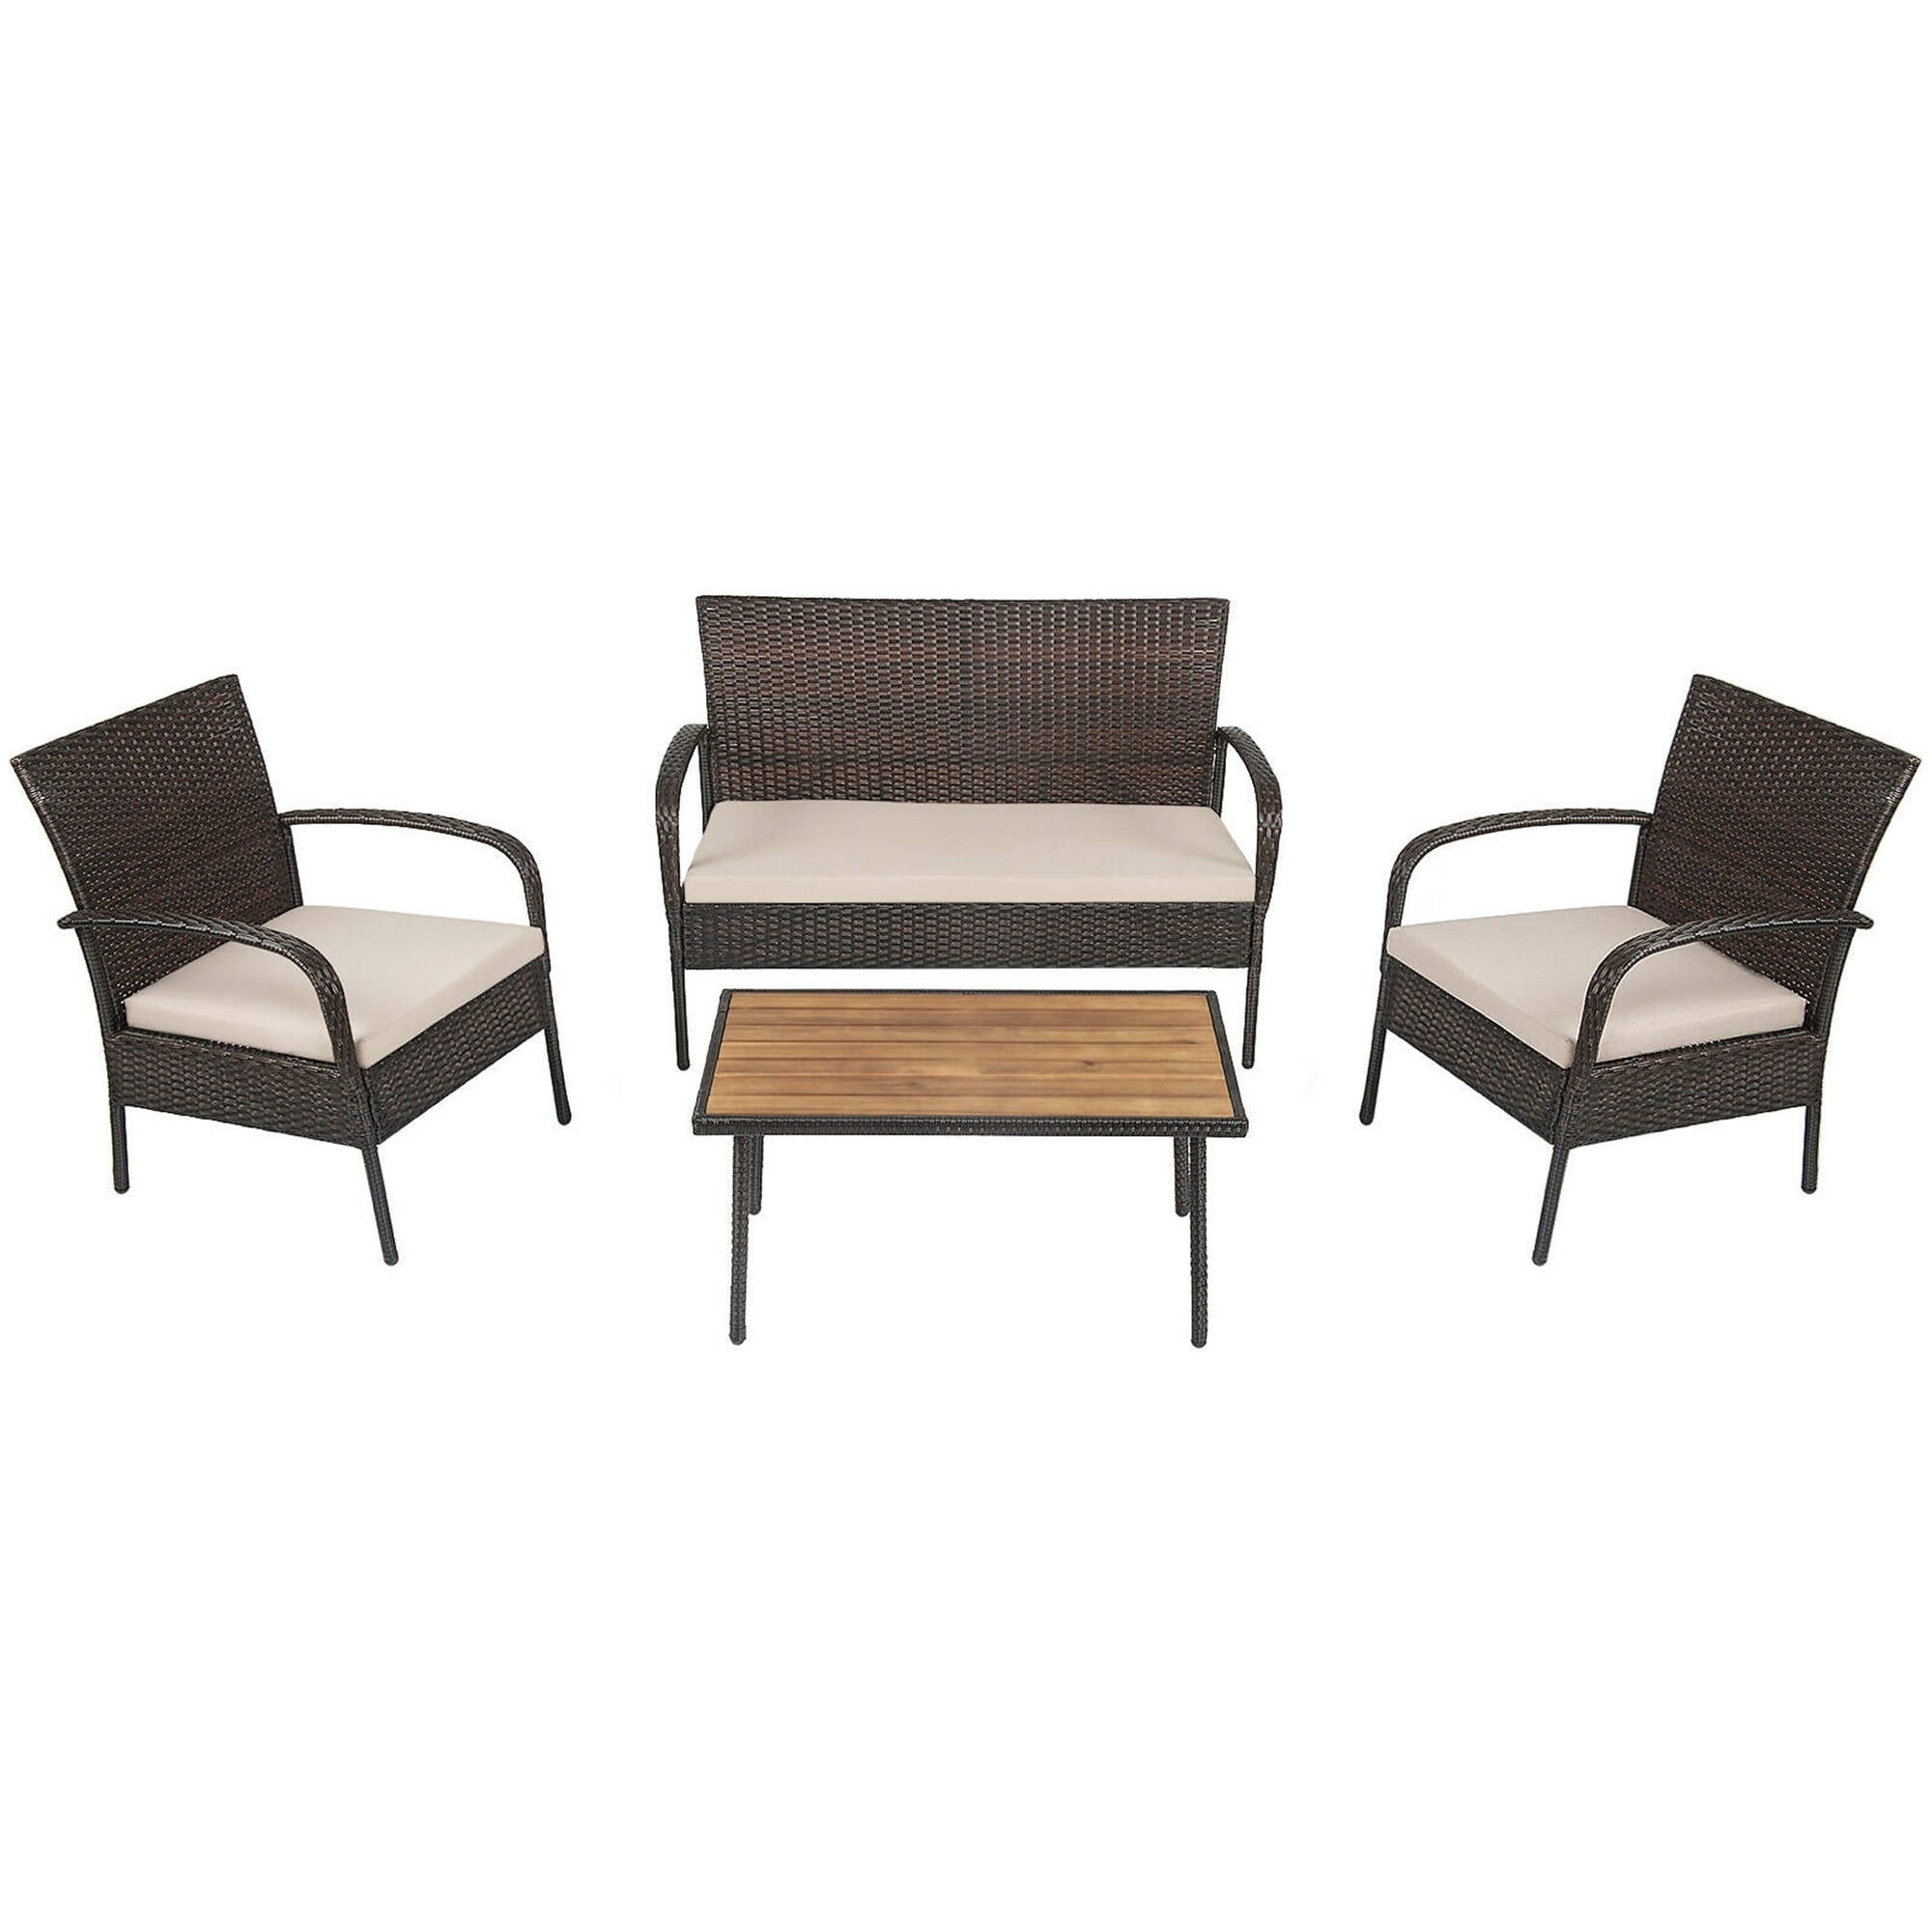 4-piece Patio Rattan Outdoor Conversation Set With Cushions